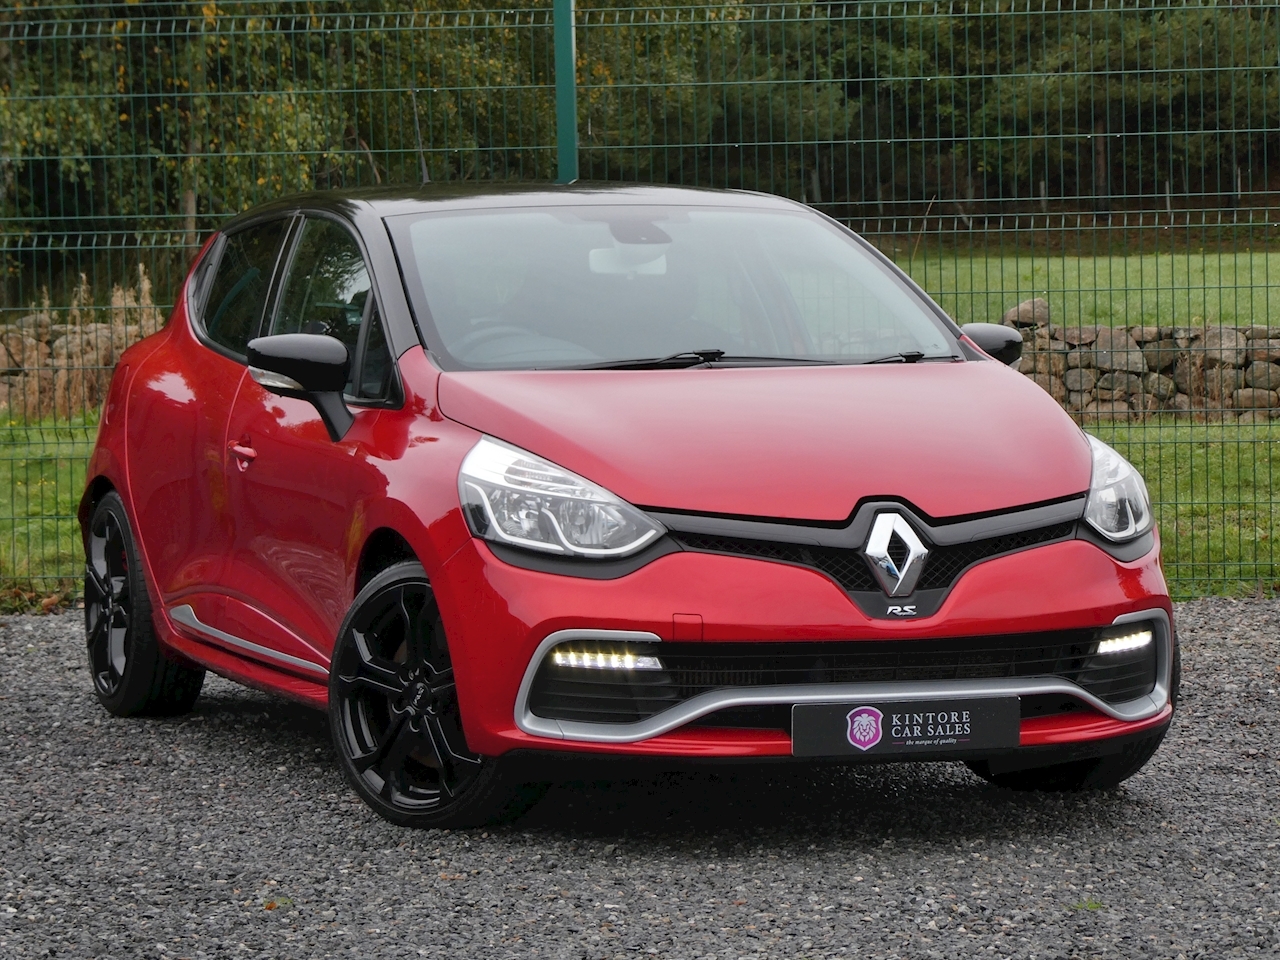 Clio 1.6 TCe Renaultsport Lux, Automatic 1.6 5dr Hatchback Automatic Petrol